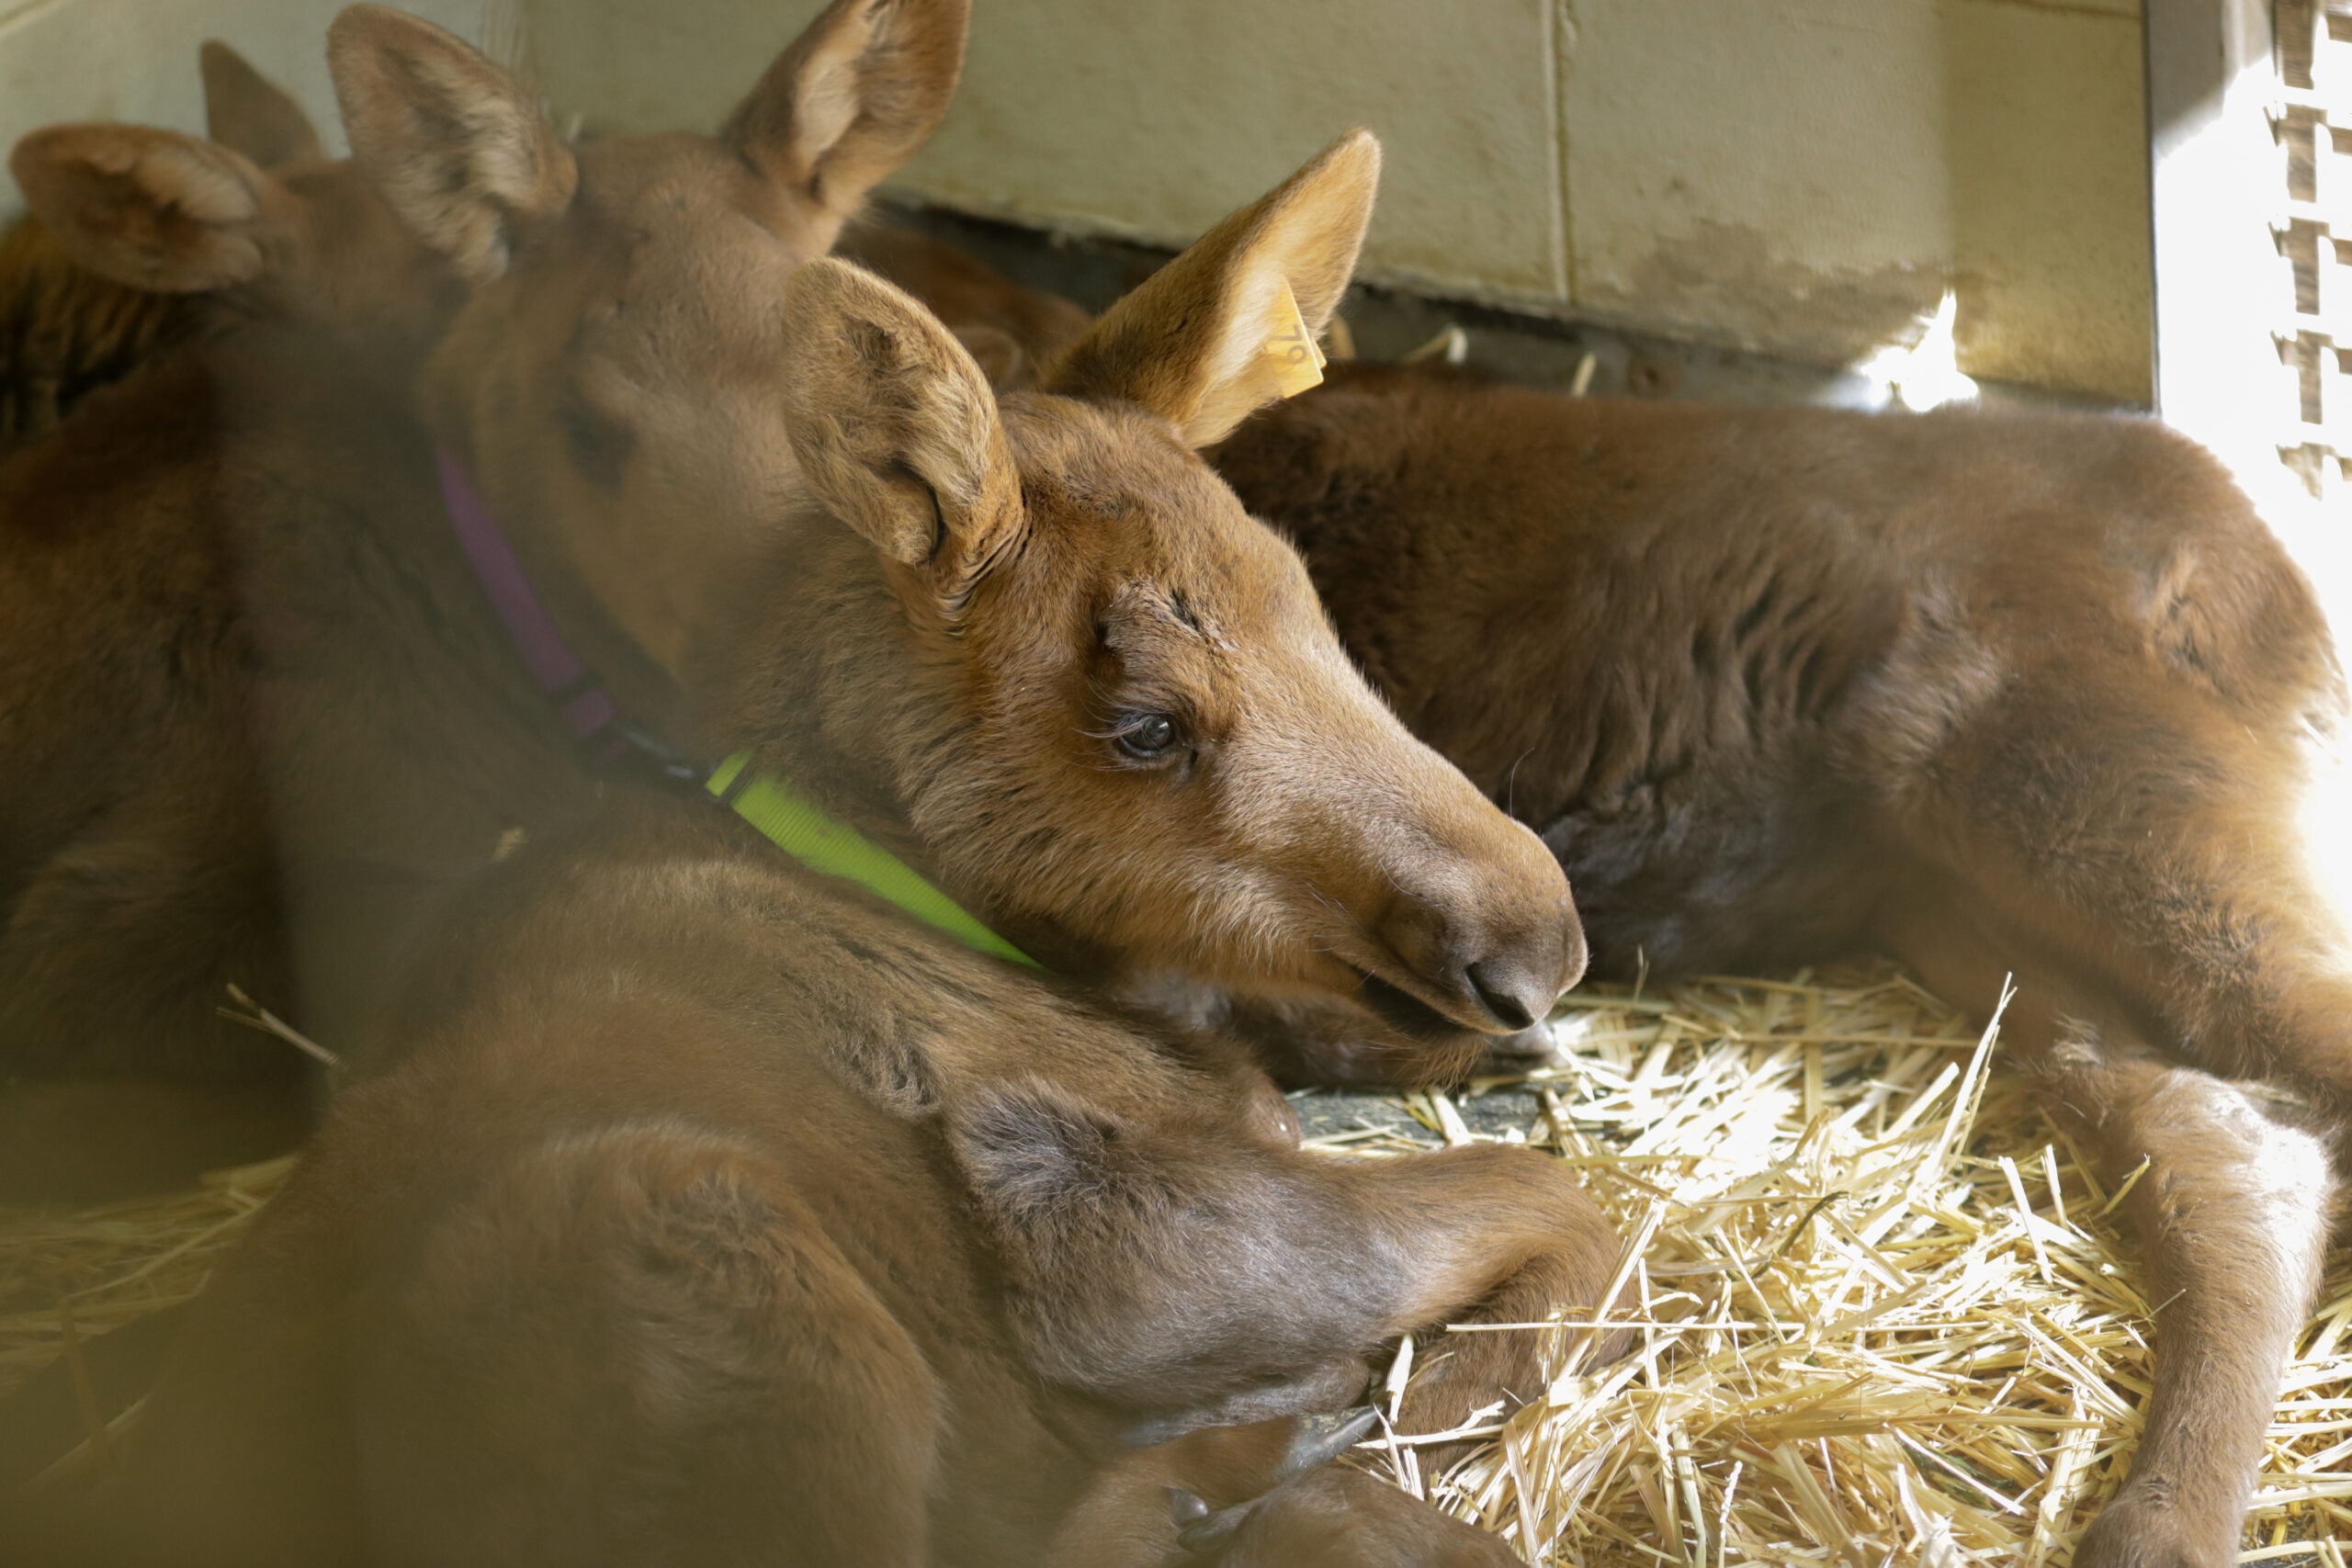 A group of Moose Calves laying down together.